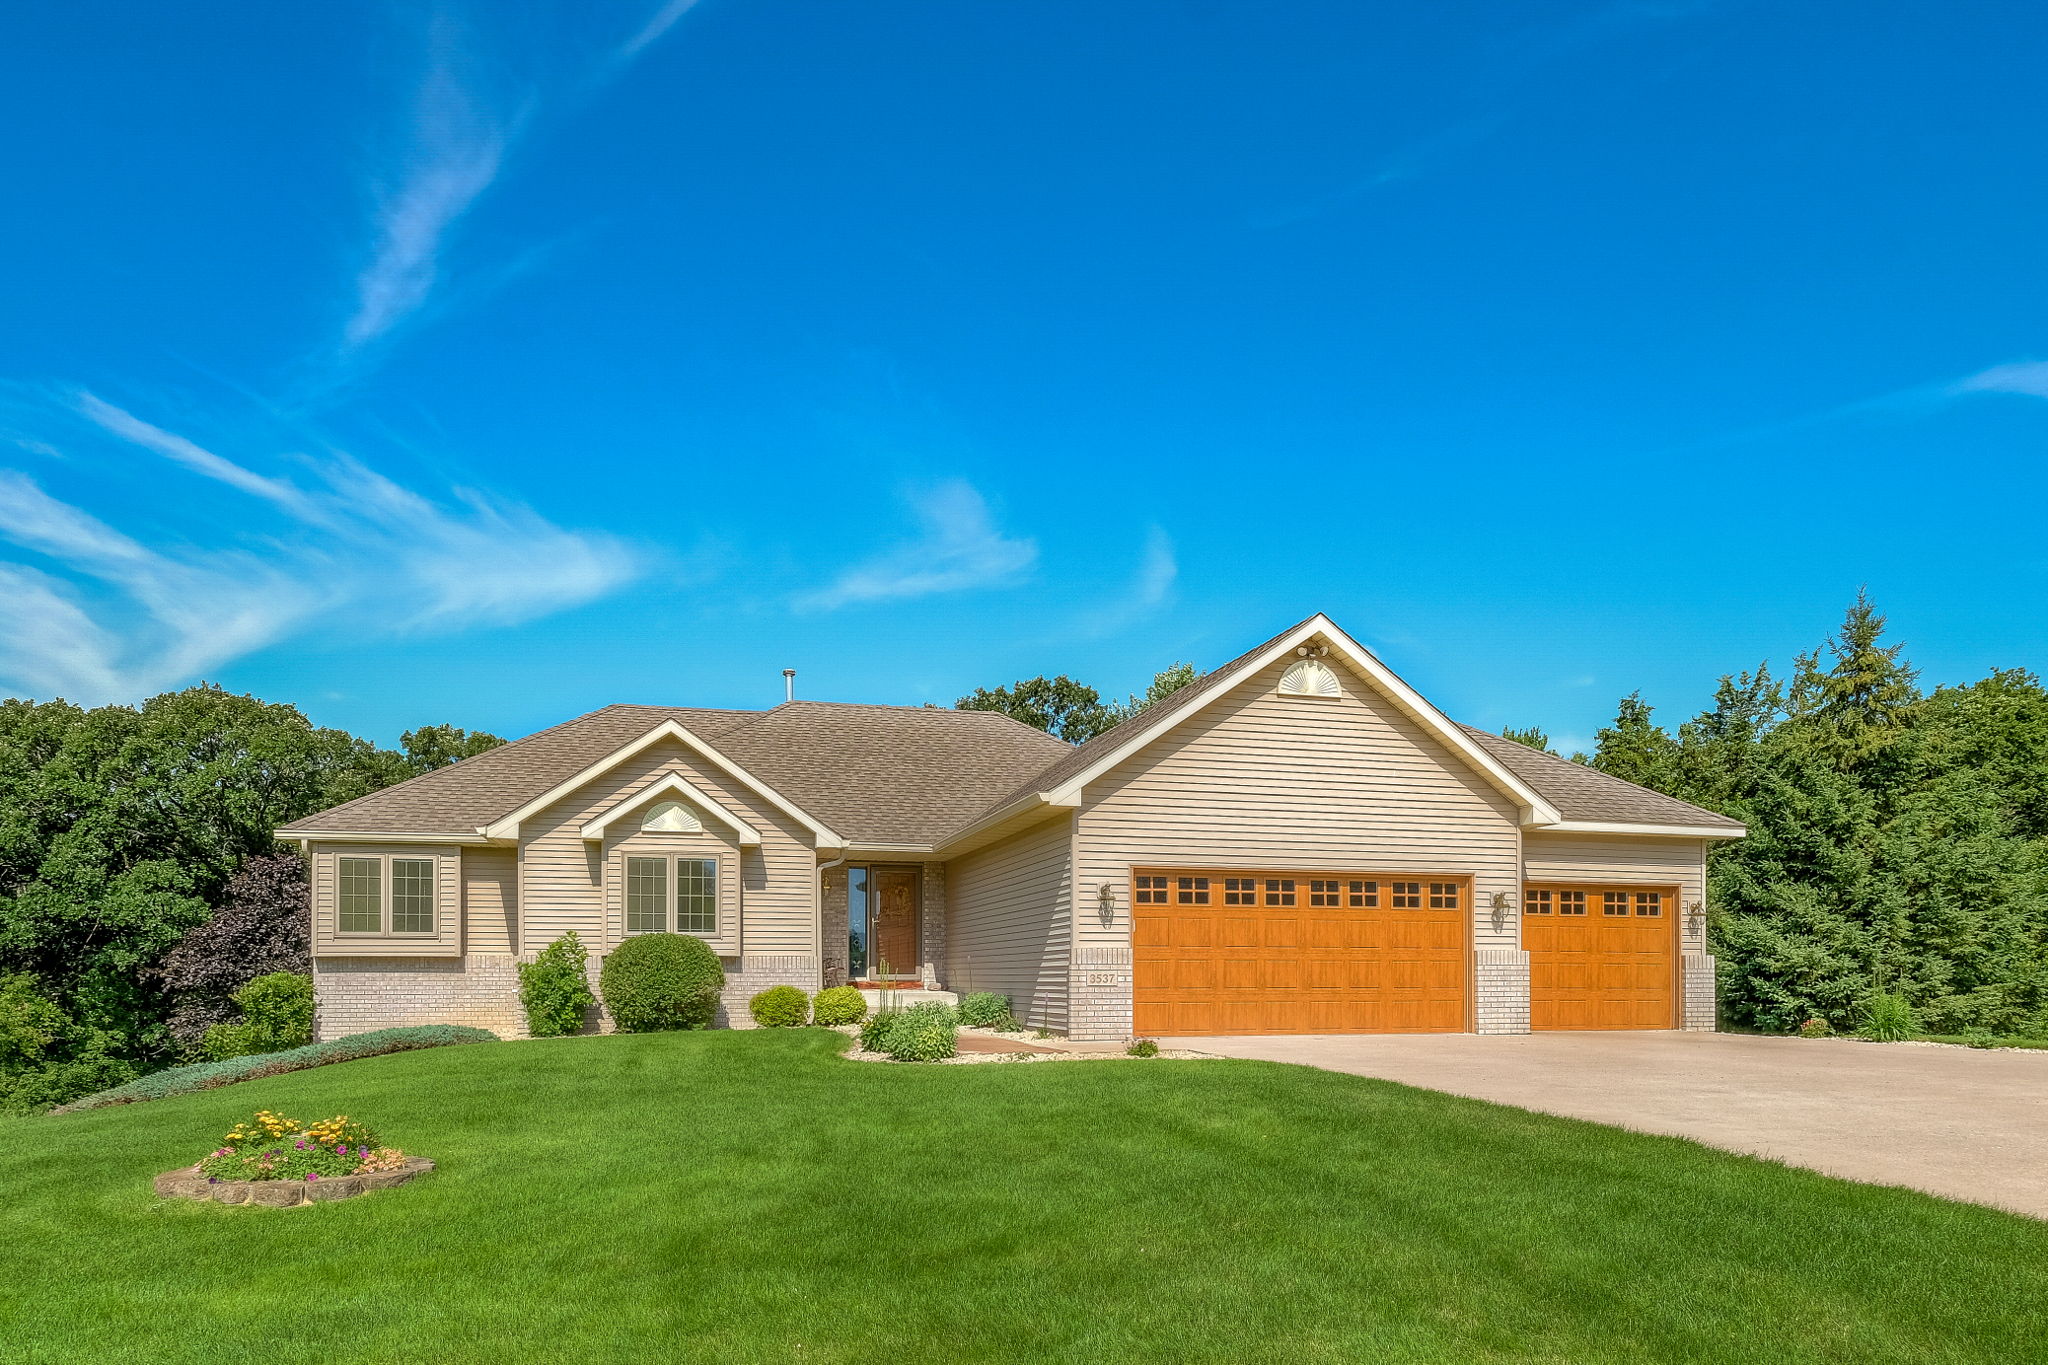  3537 166th Ln NW, Andover, MN 55304, US